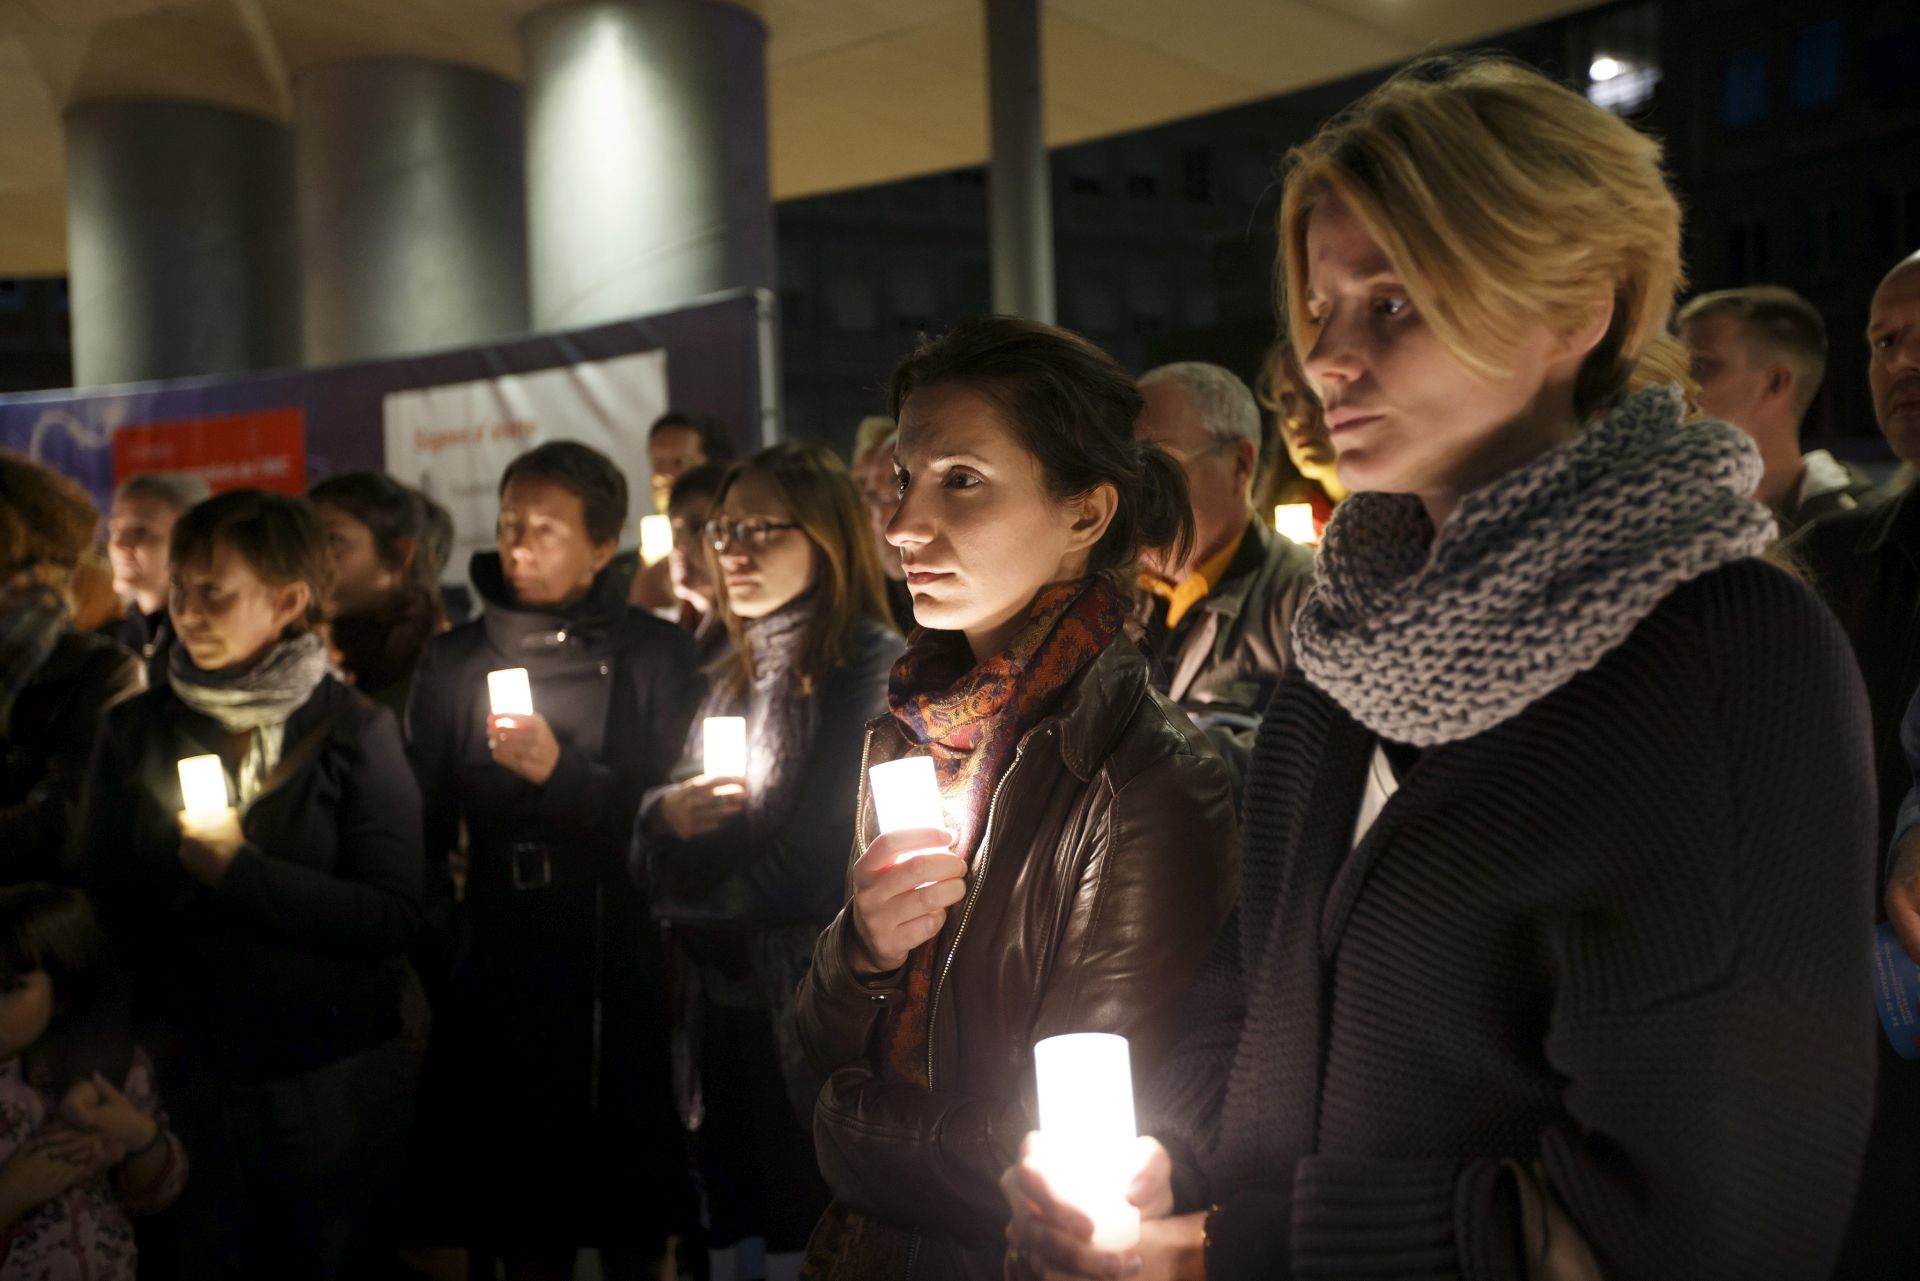 epa05568773 Participants and staff MSF (Medecins Sans Frontieres) hold lights during a commemoration for the victims of the US attack on the Kunduz hospital in Afghanistan, at the Geneva University Hospital (HUG) in Geneva, Switzerland, 03 October 2016. The Medecins Sans Frontieres, MSF, also known as Doctors Without Borders, launches the #NotATarget campaign so to increase the political costs of non-compliance of the laws of war and inform civil society of the non-compliance of unarmed populations in conflict zones.  EPA/SALVATORE DI NOLFI